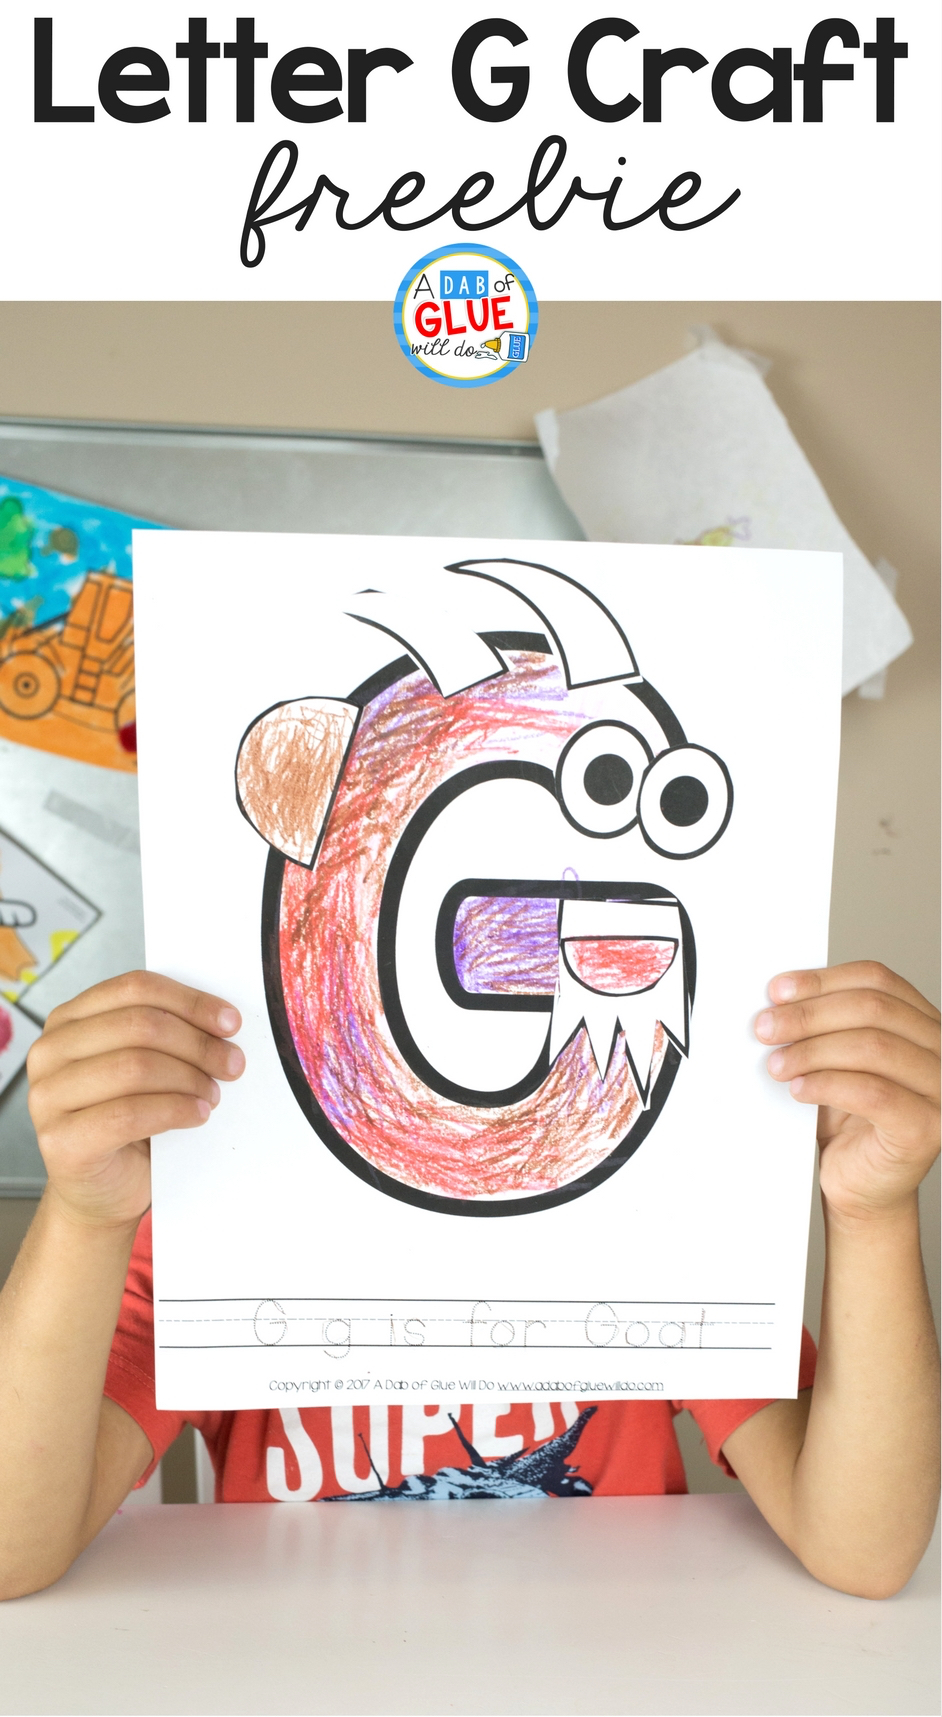 We are back with our Animal Alphabet Letter of the Week Series! This special series is dedicated to helping you teach your students and children the letters of the alphabet in a fun, hands-on way. Each week we share alphabet crafts that your child can color, cut, trace, and glue to make a fun animal that begins with the featured letter! Let's get back to it with this G is for Goat craft!